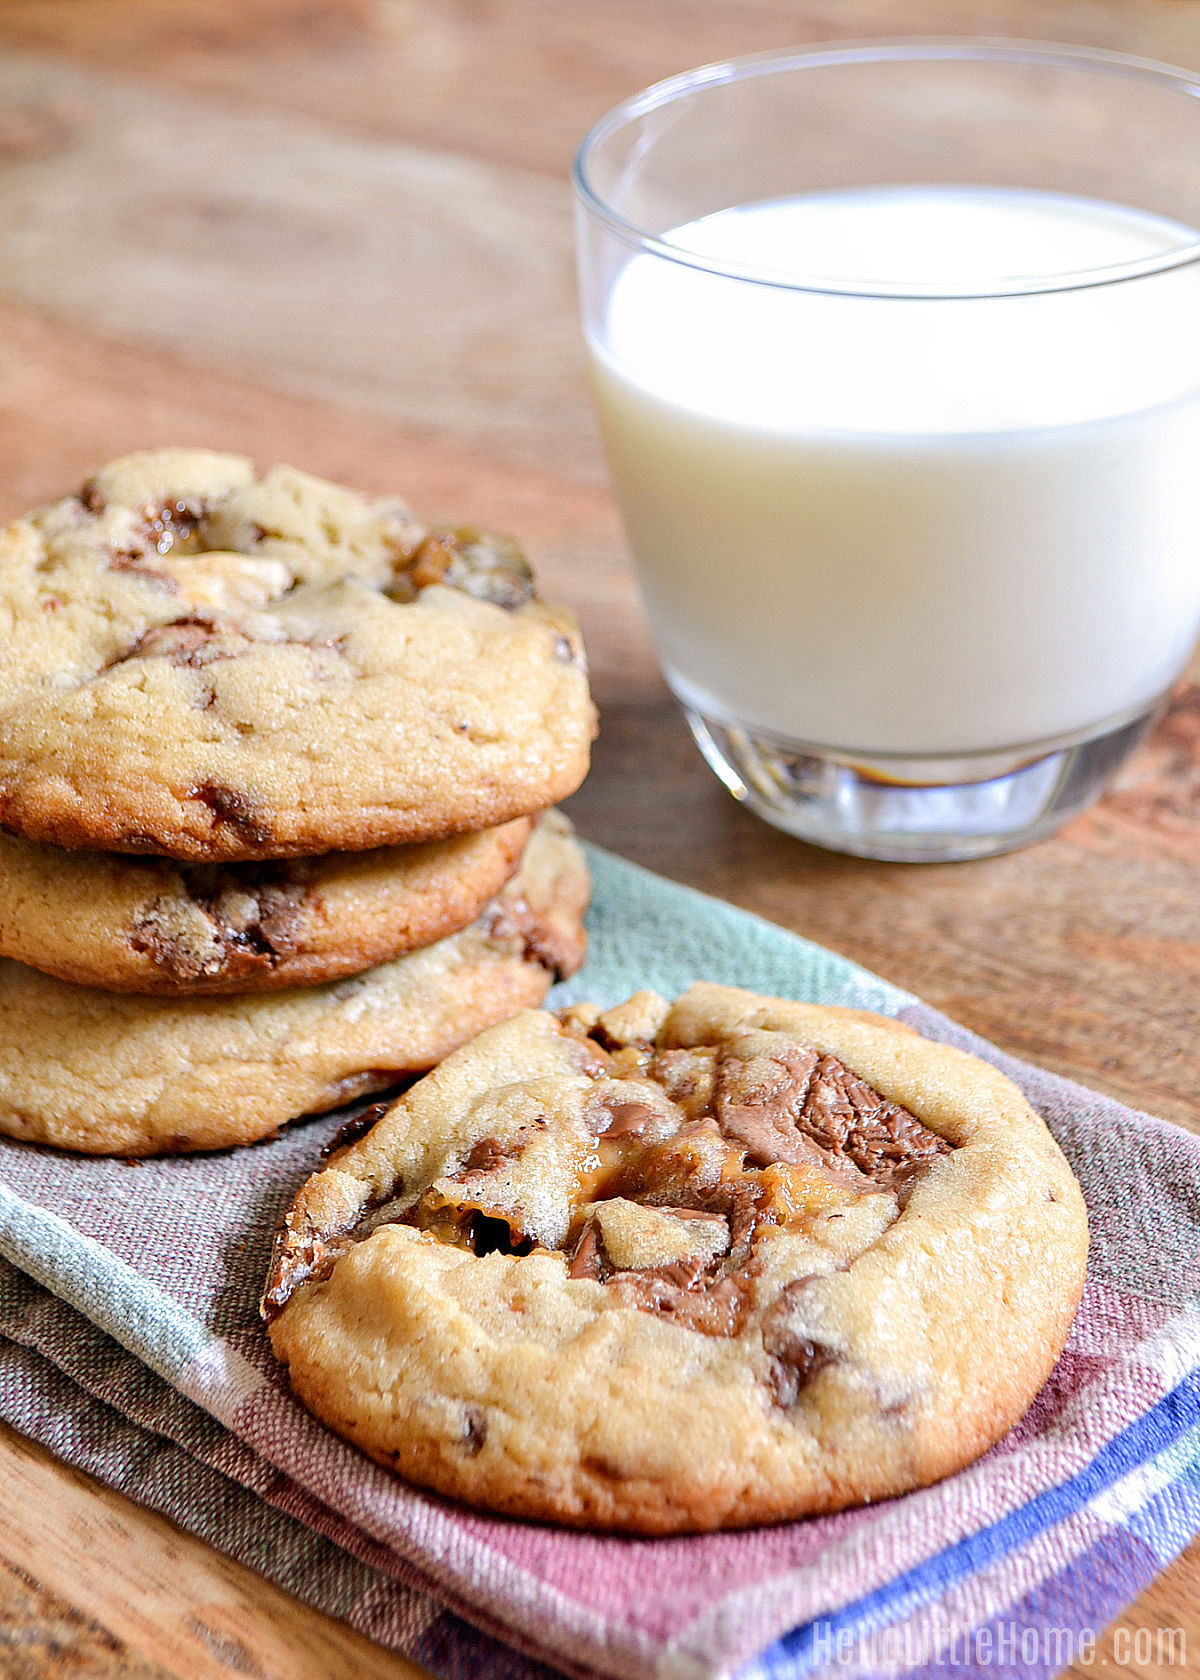 Stacks of Halloween Candy Cookies next to a glass of milk.